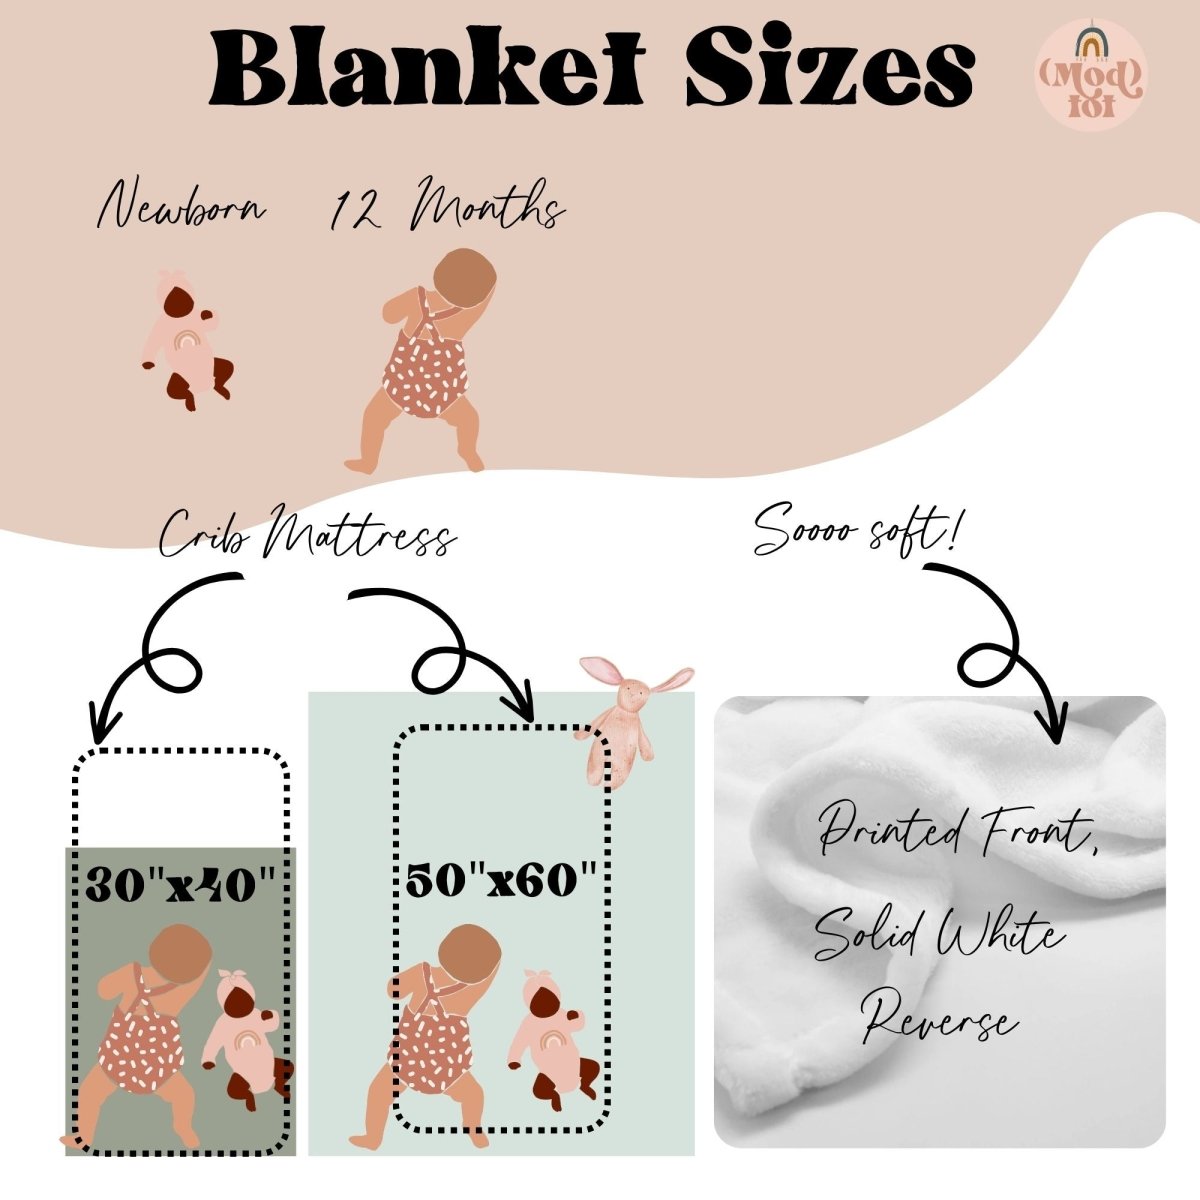 Flamingo Floral Personalized Baby Blanket - Flamingo Floral, gender_girl, text